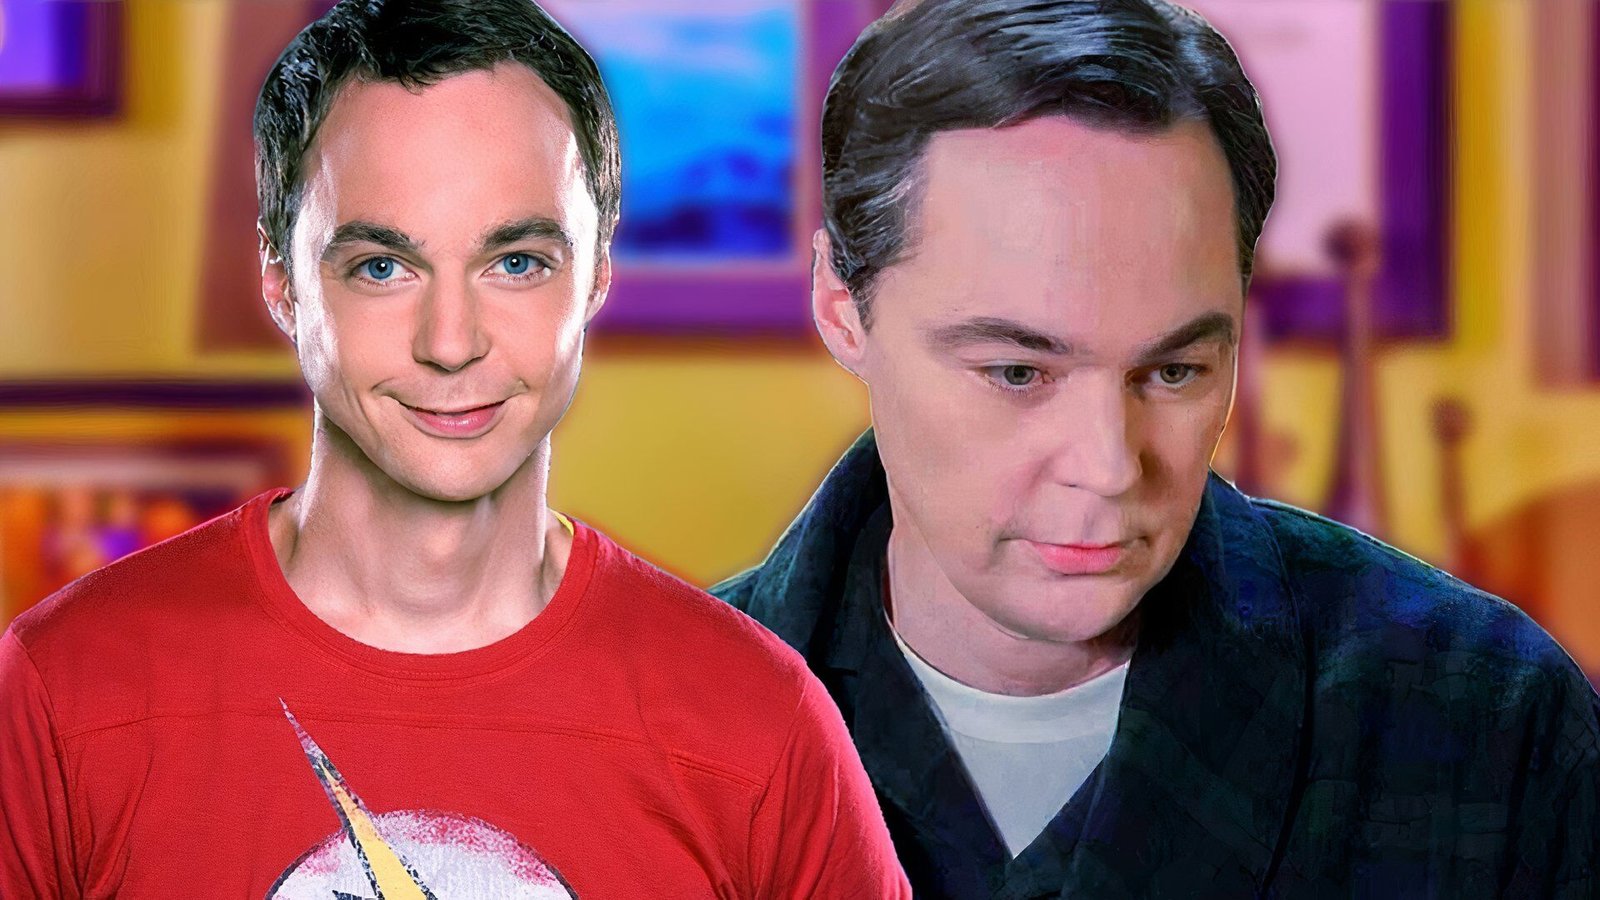 Young Sheldon EP Explains The Biggest Change to Jim Parsons' Older Sheldon from The Big Bang Theory Finale